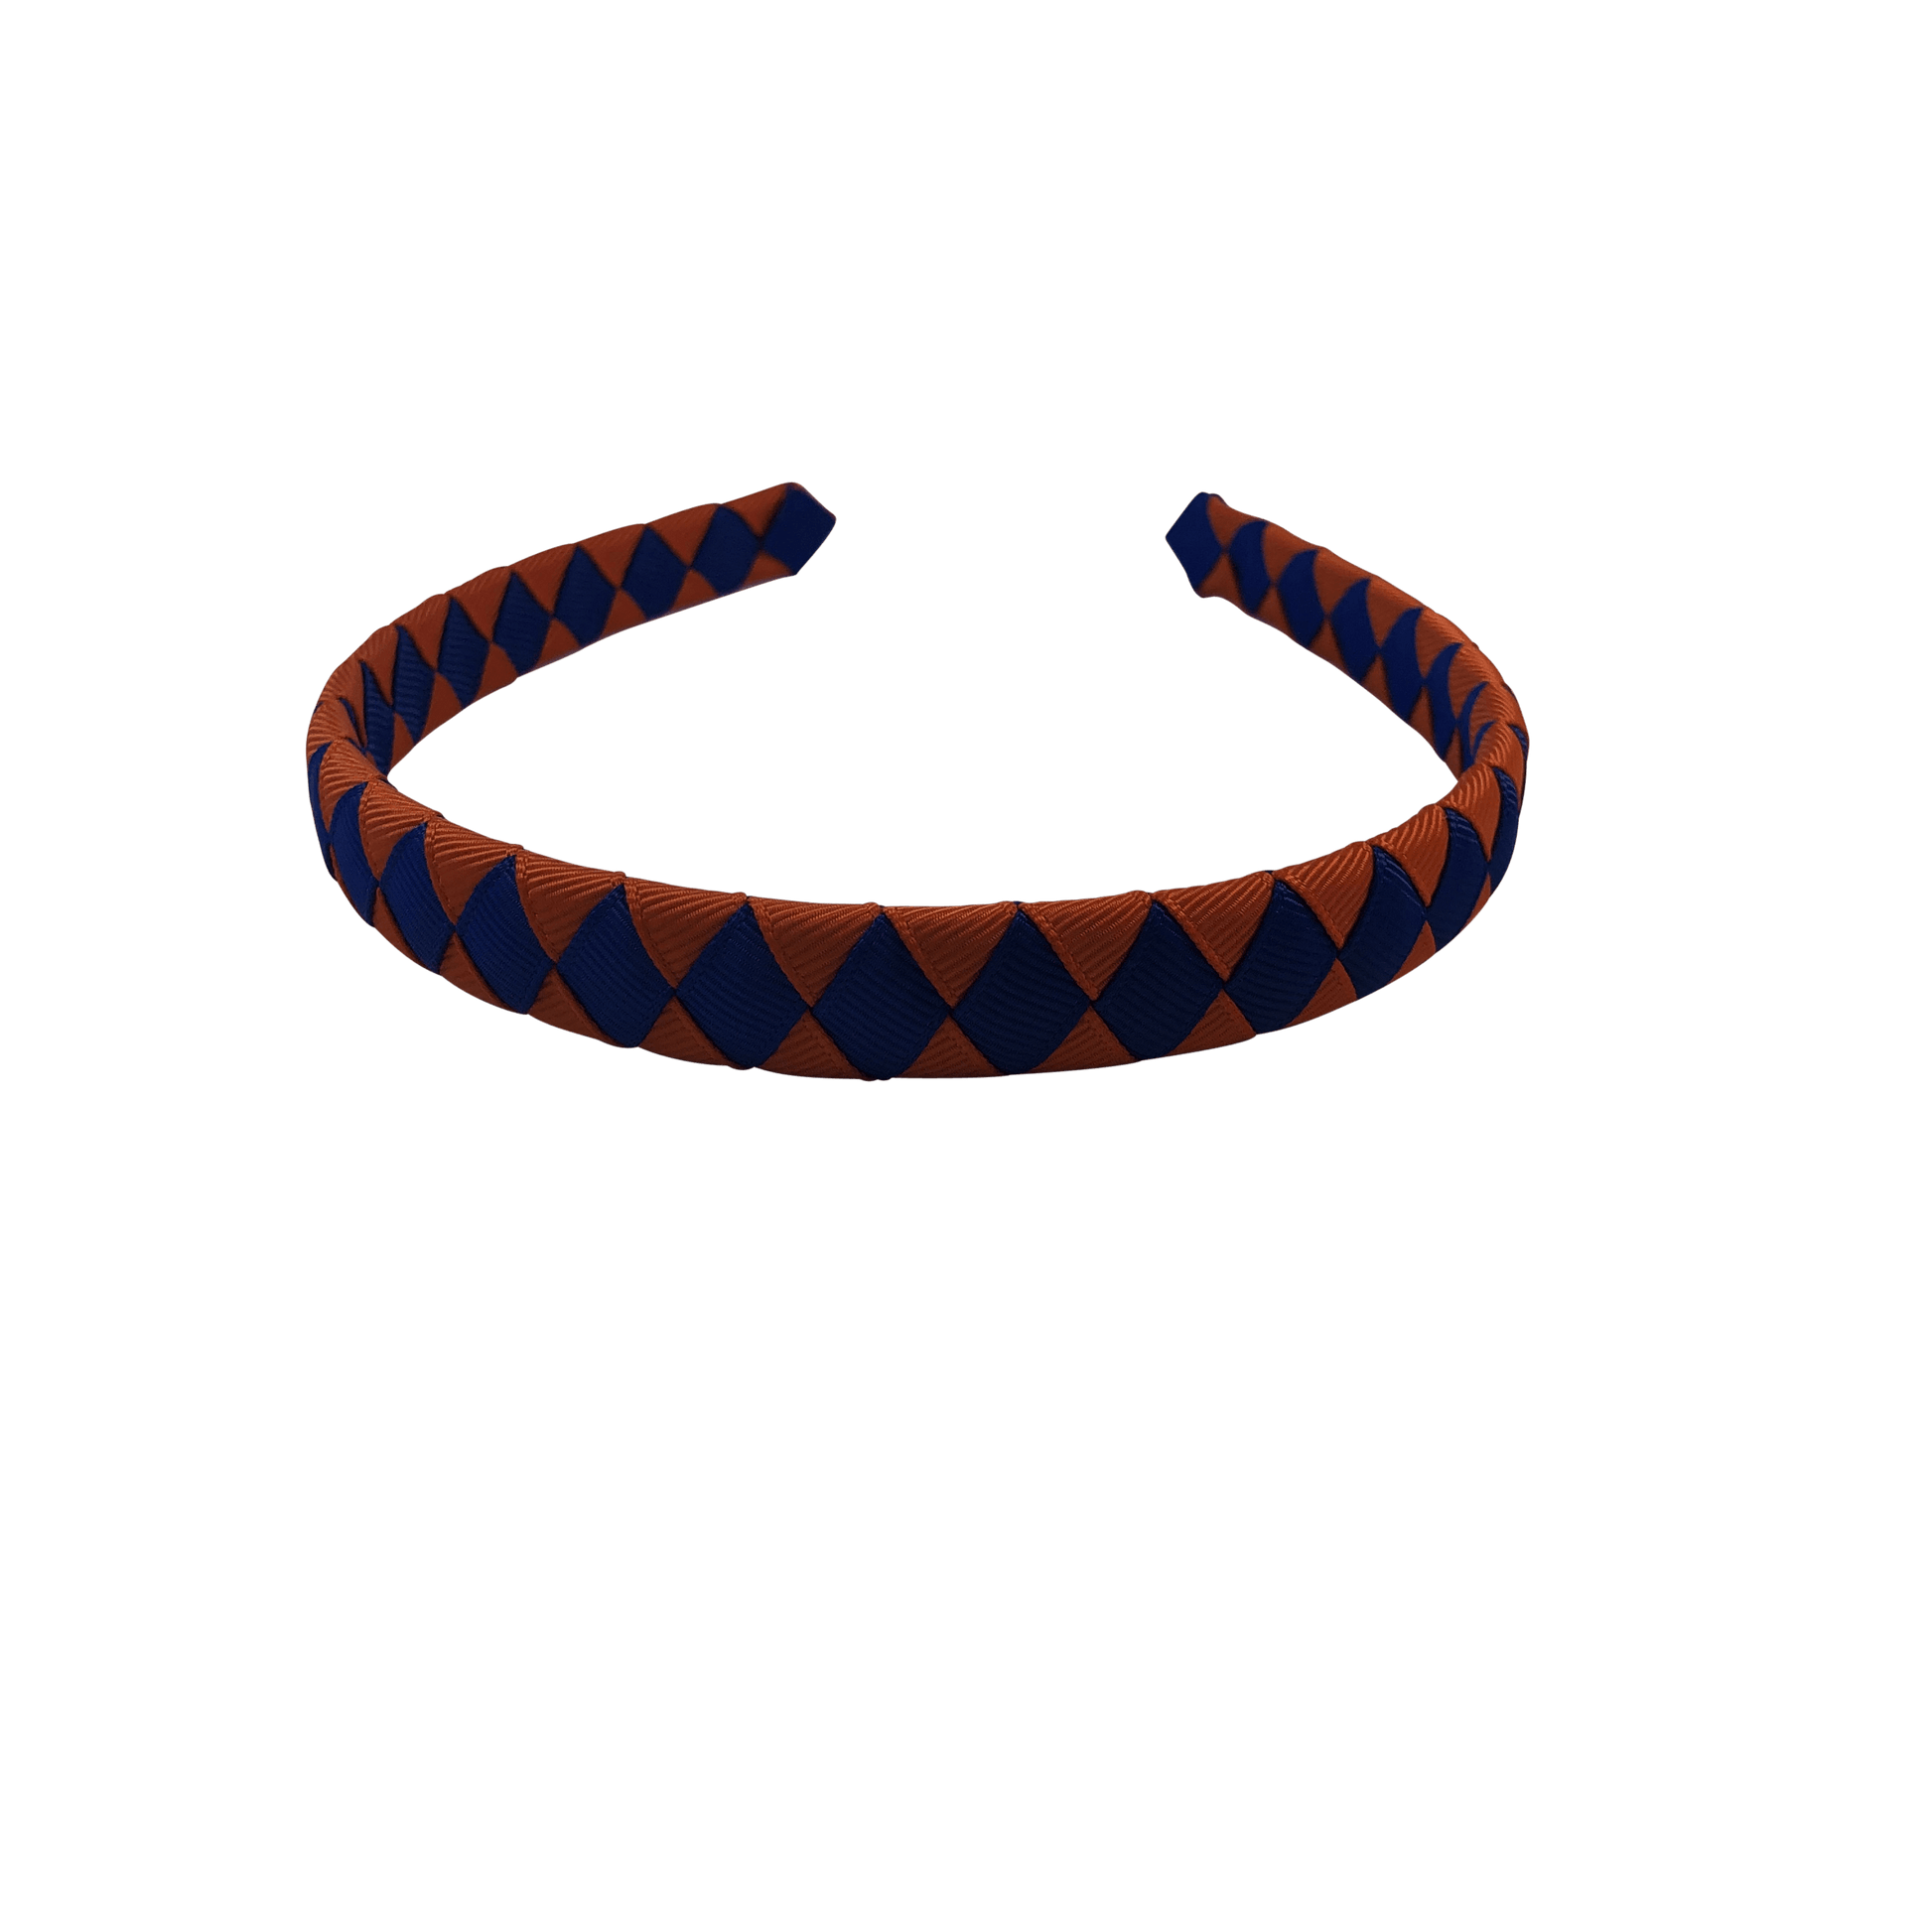 Orange & Royal Blue Hair Accessories - Assorted Hair Accessories - School Uniform Hair Accessories - Ponytails and Fairytales